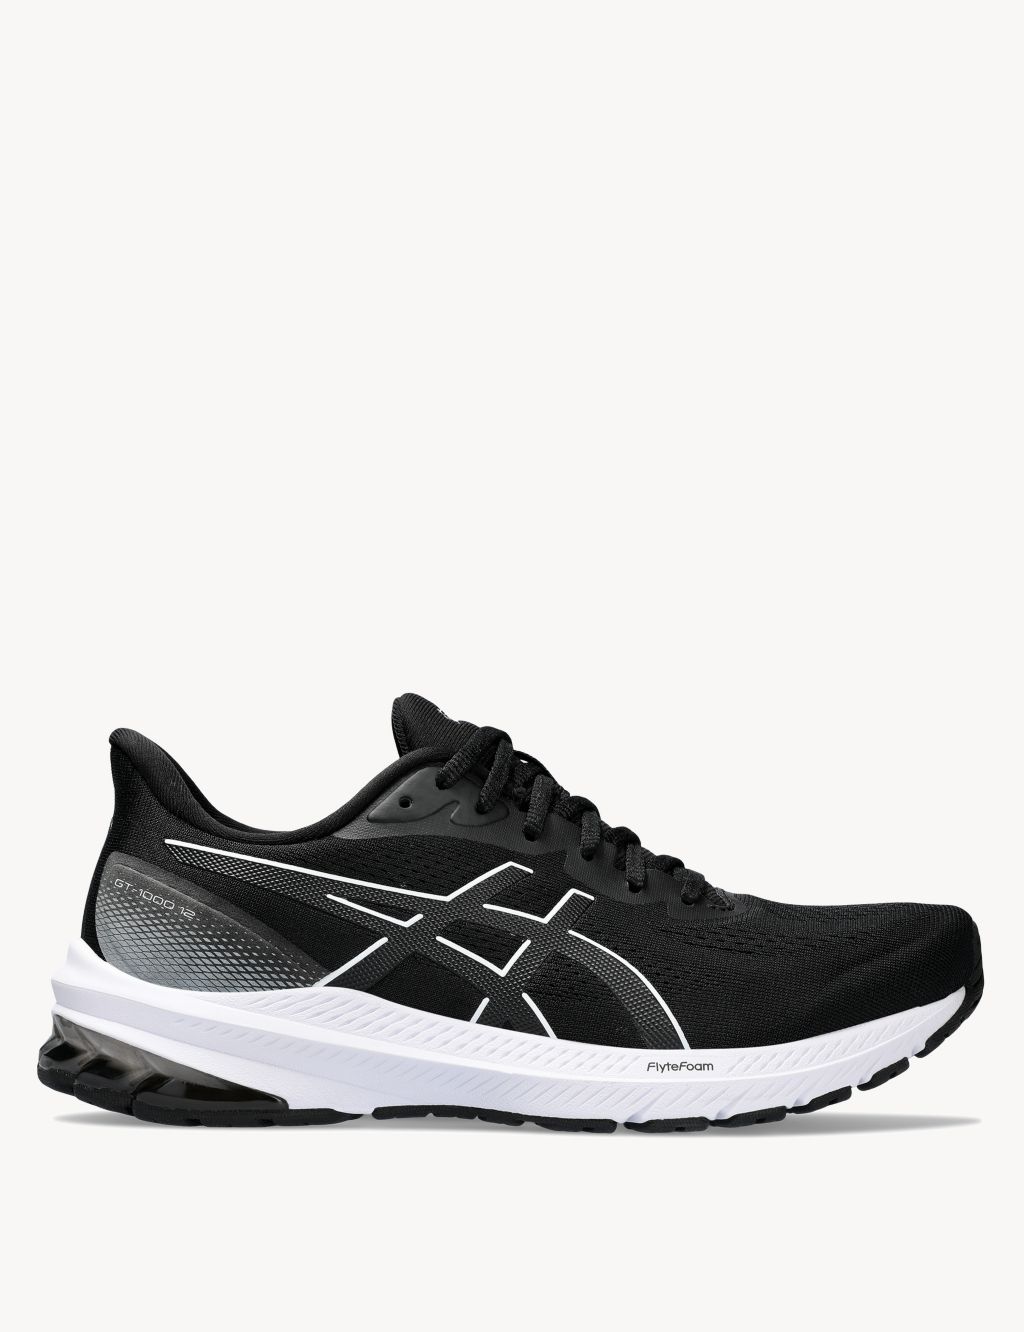 GT-1000 12 Lace Up Mesh Detail Trainers | ASICS | M&S